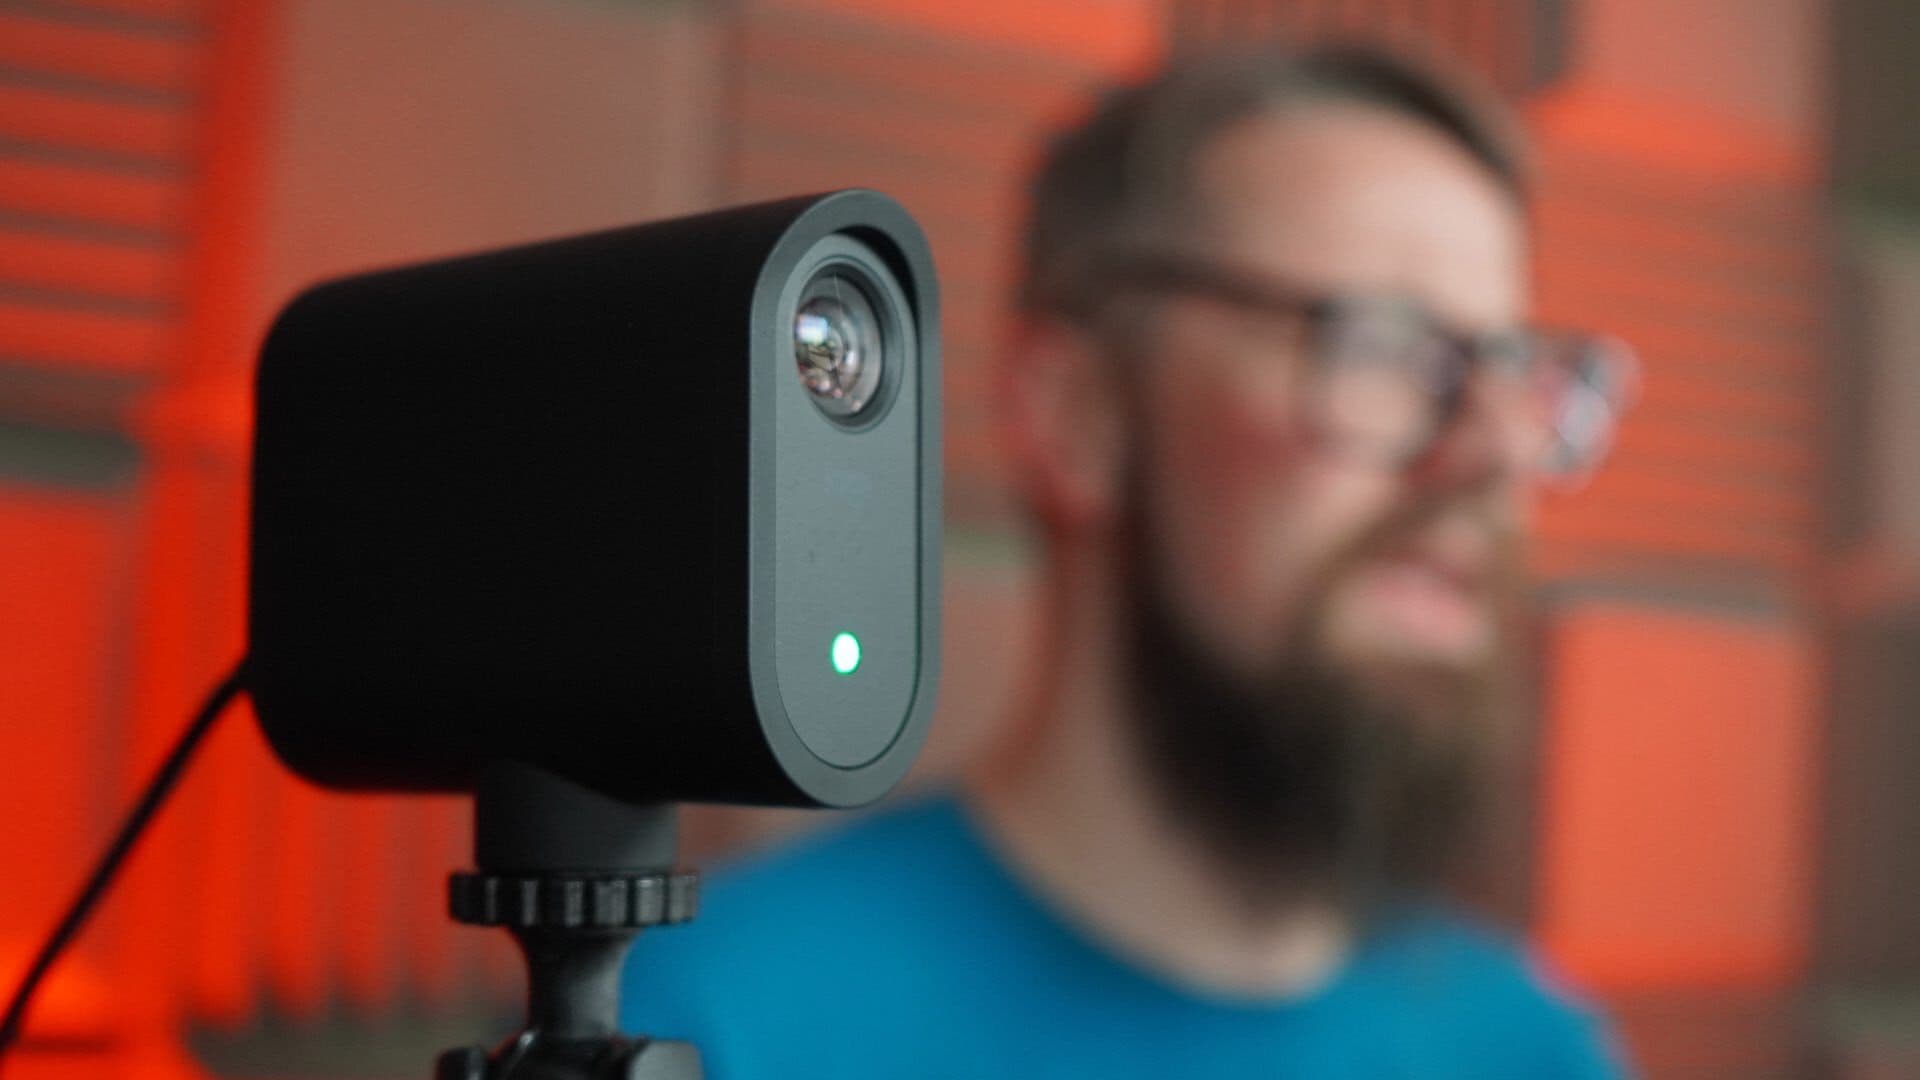 A Mevo camera in the foreground, pointing to the side and off-screen, with a man out of focus in the background.